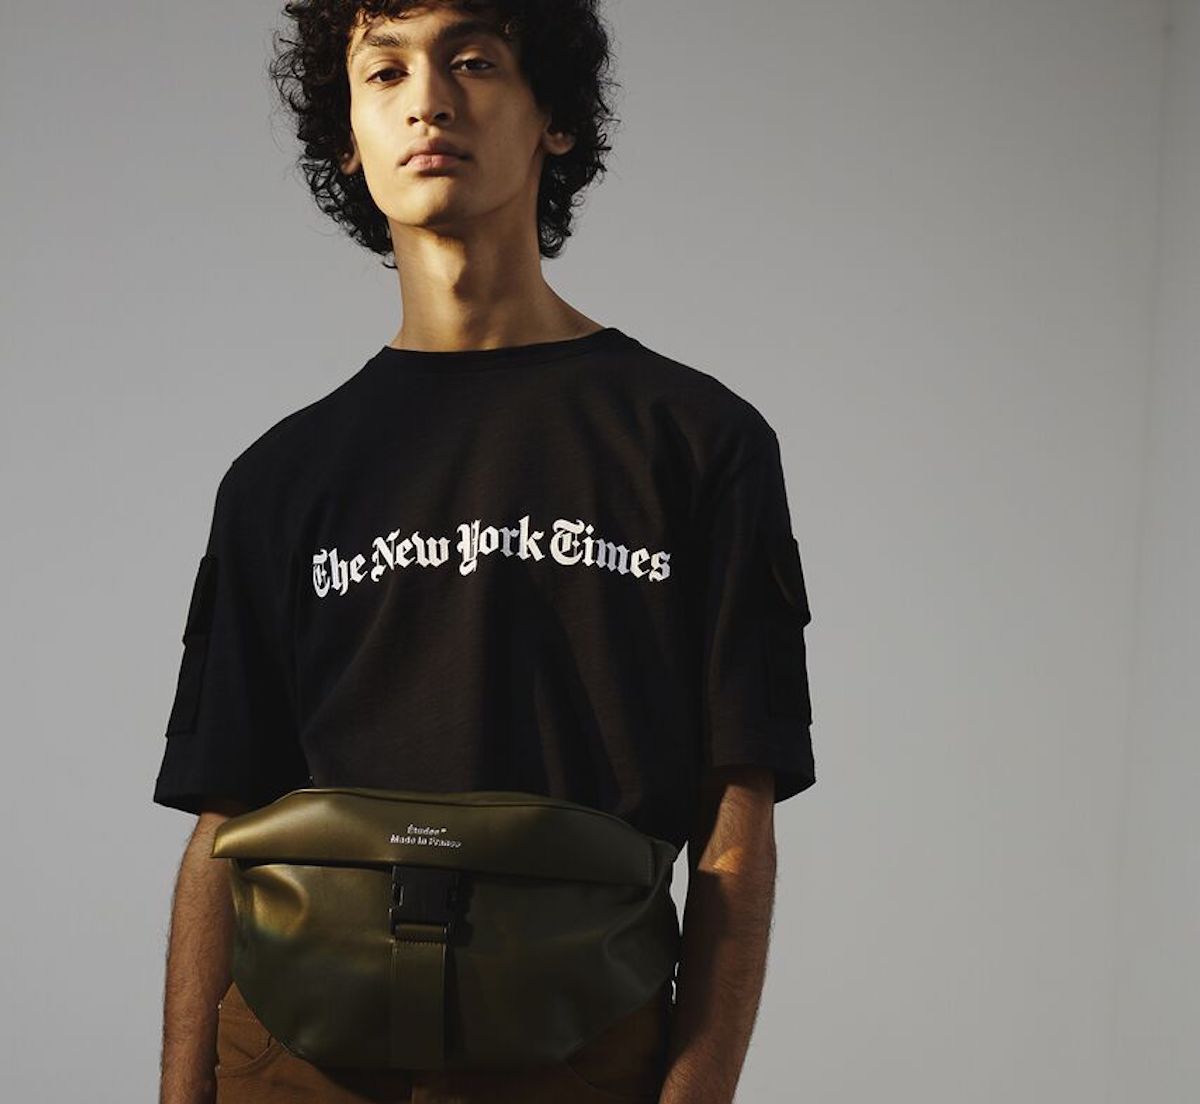 Études & The New York Times Reveal New Collaborative Collection